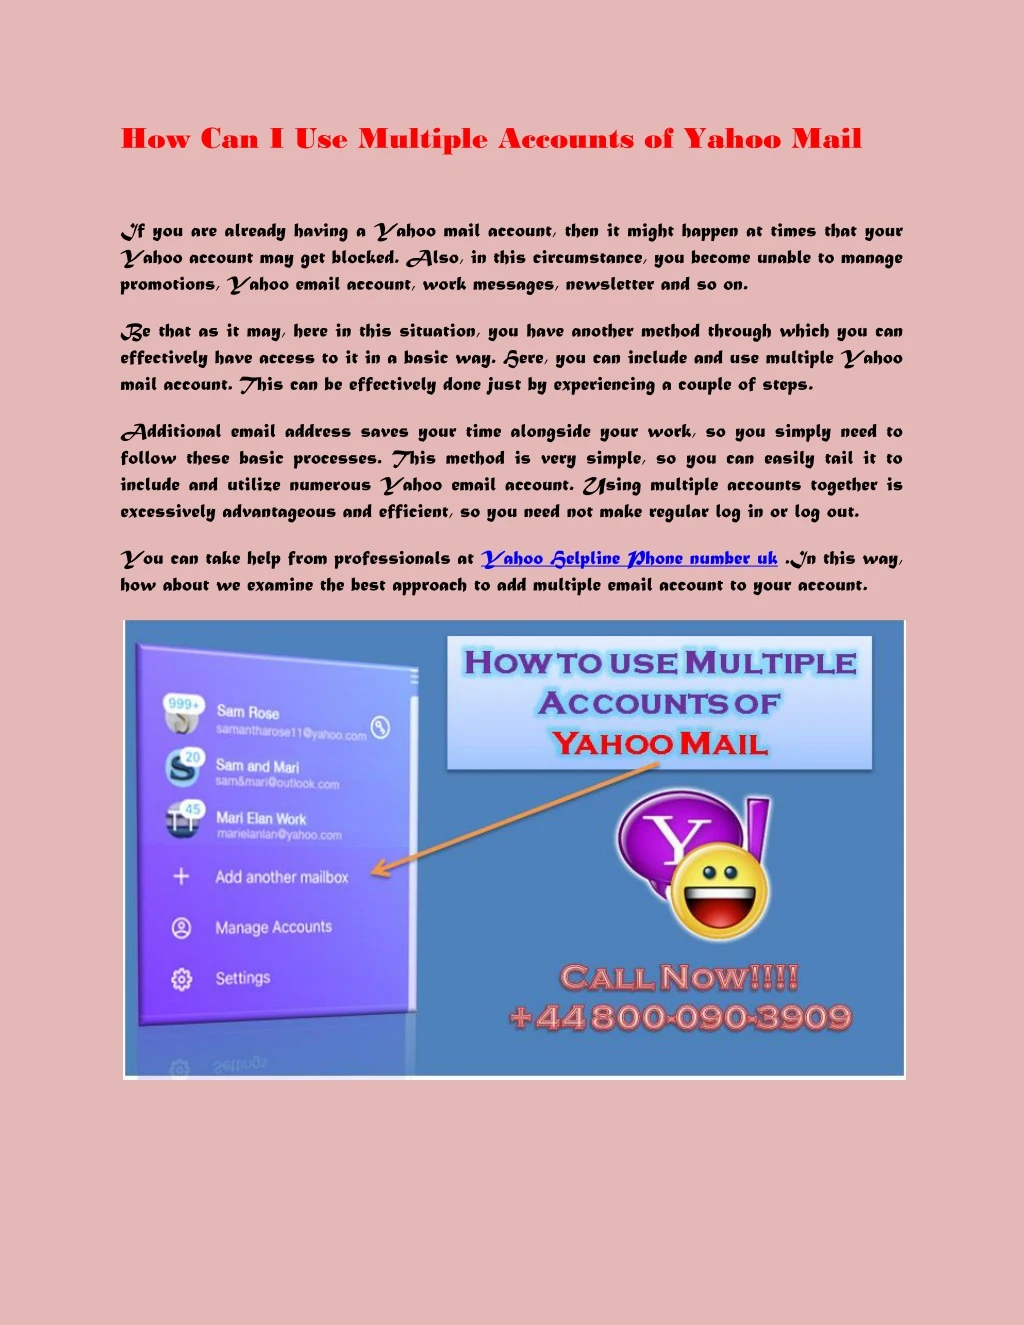 how can i use multiple accounts of yahoo mail